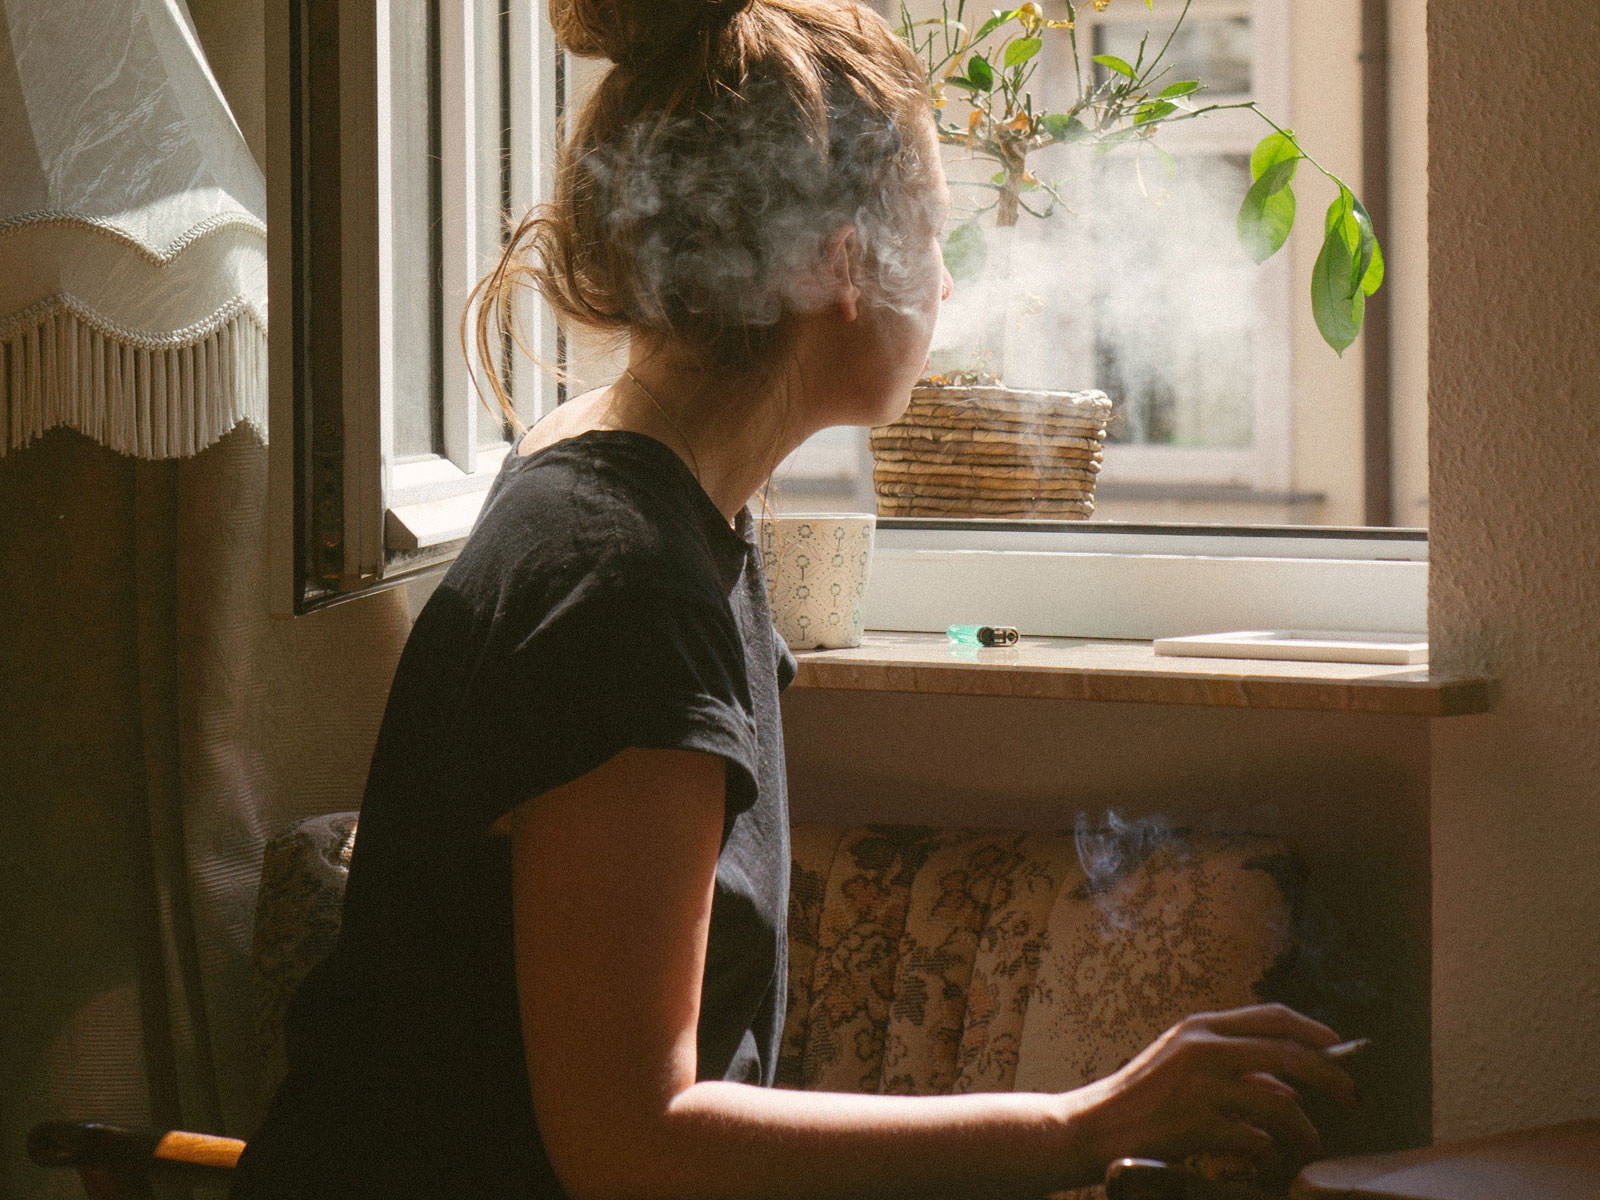 Woman smoking cannabis joint looking out window